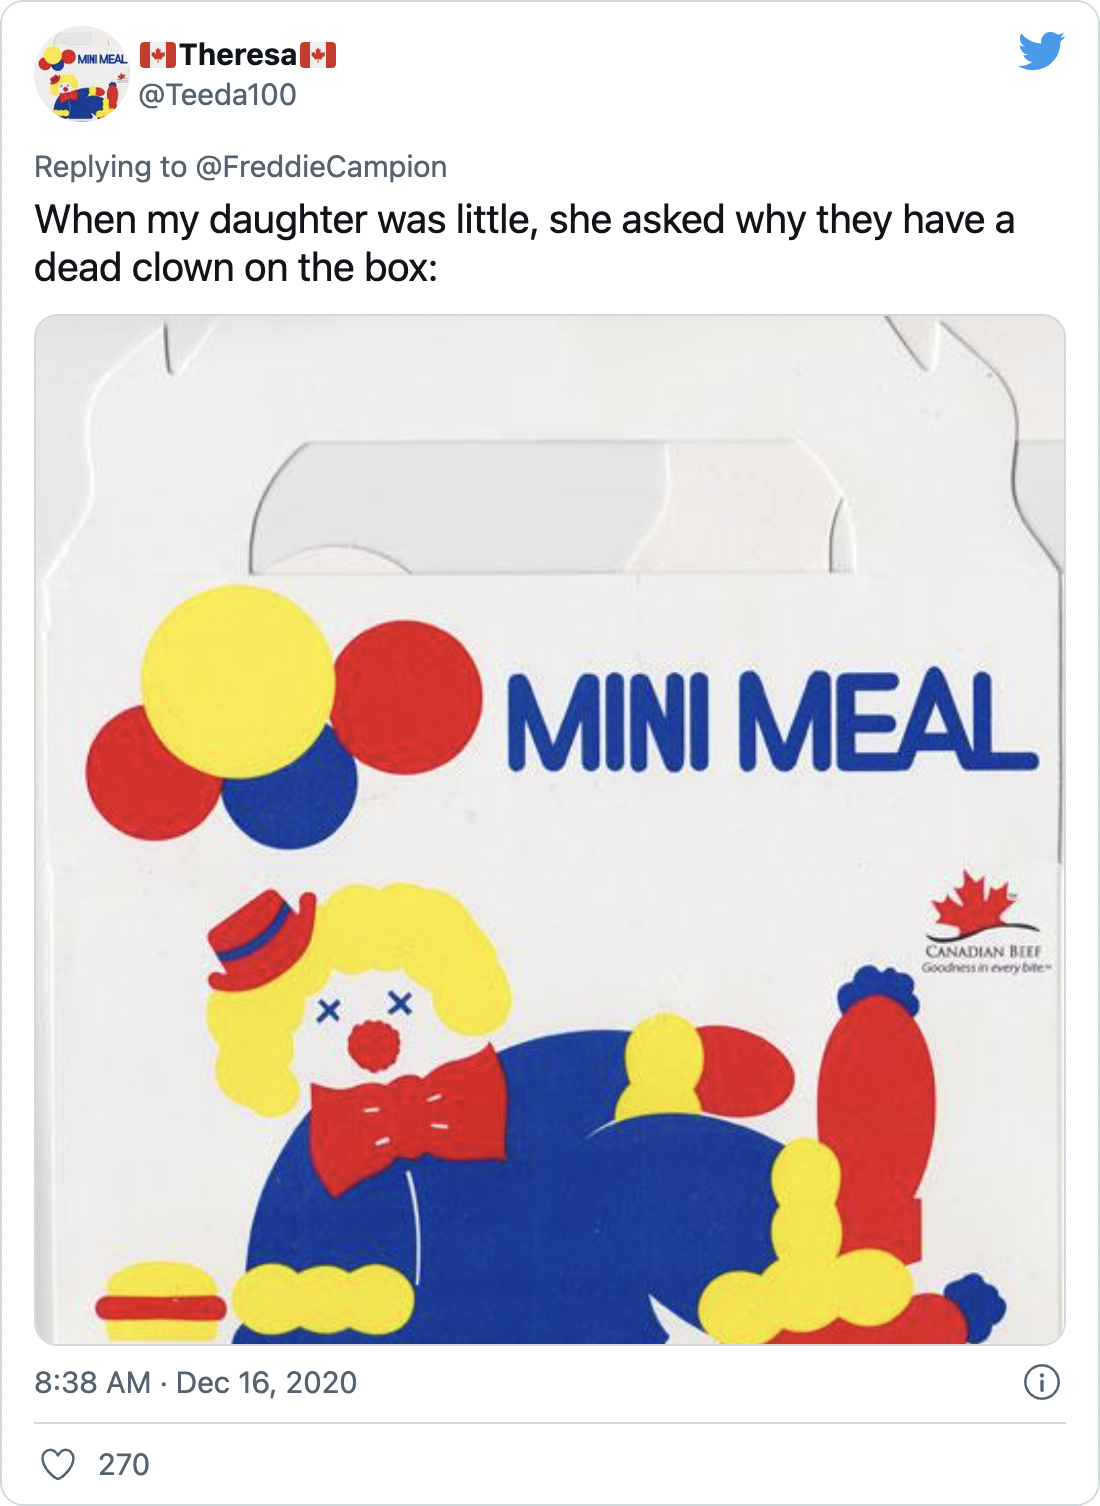 When my daughter was little, she asked why they have a dead clown on the box: - @Teeda100